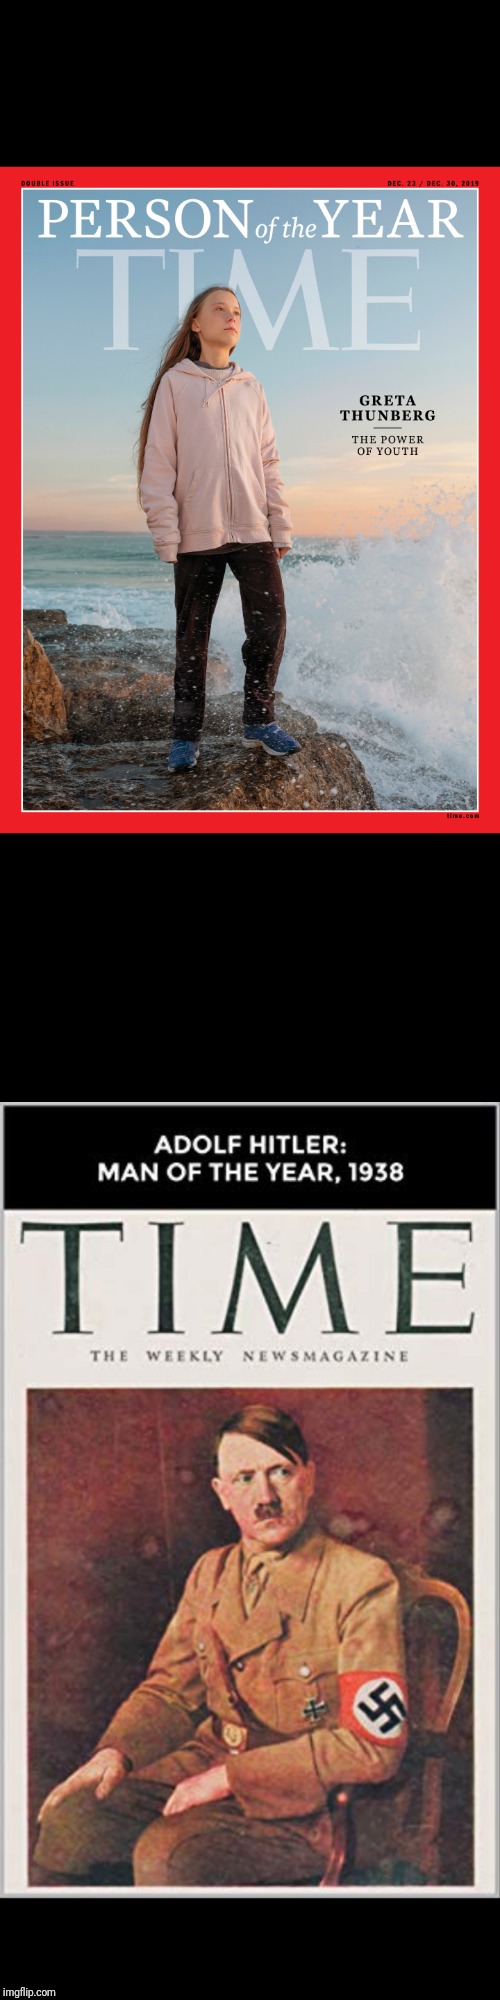 Presented with no comment. | image tagged in greta thunberg,hitler,adolf hitler,time | made w/ Imgflip meme maker